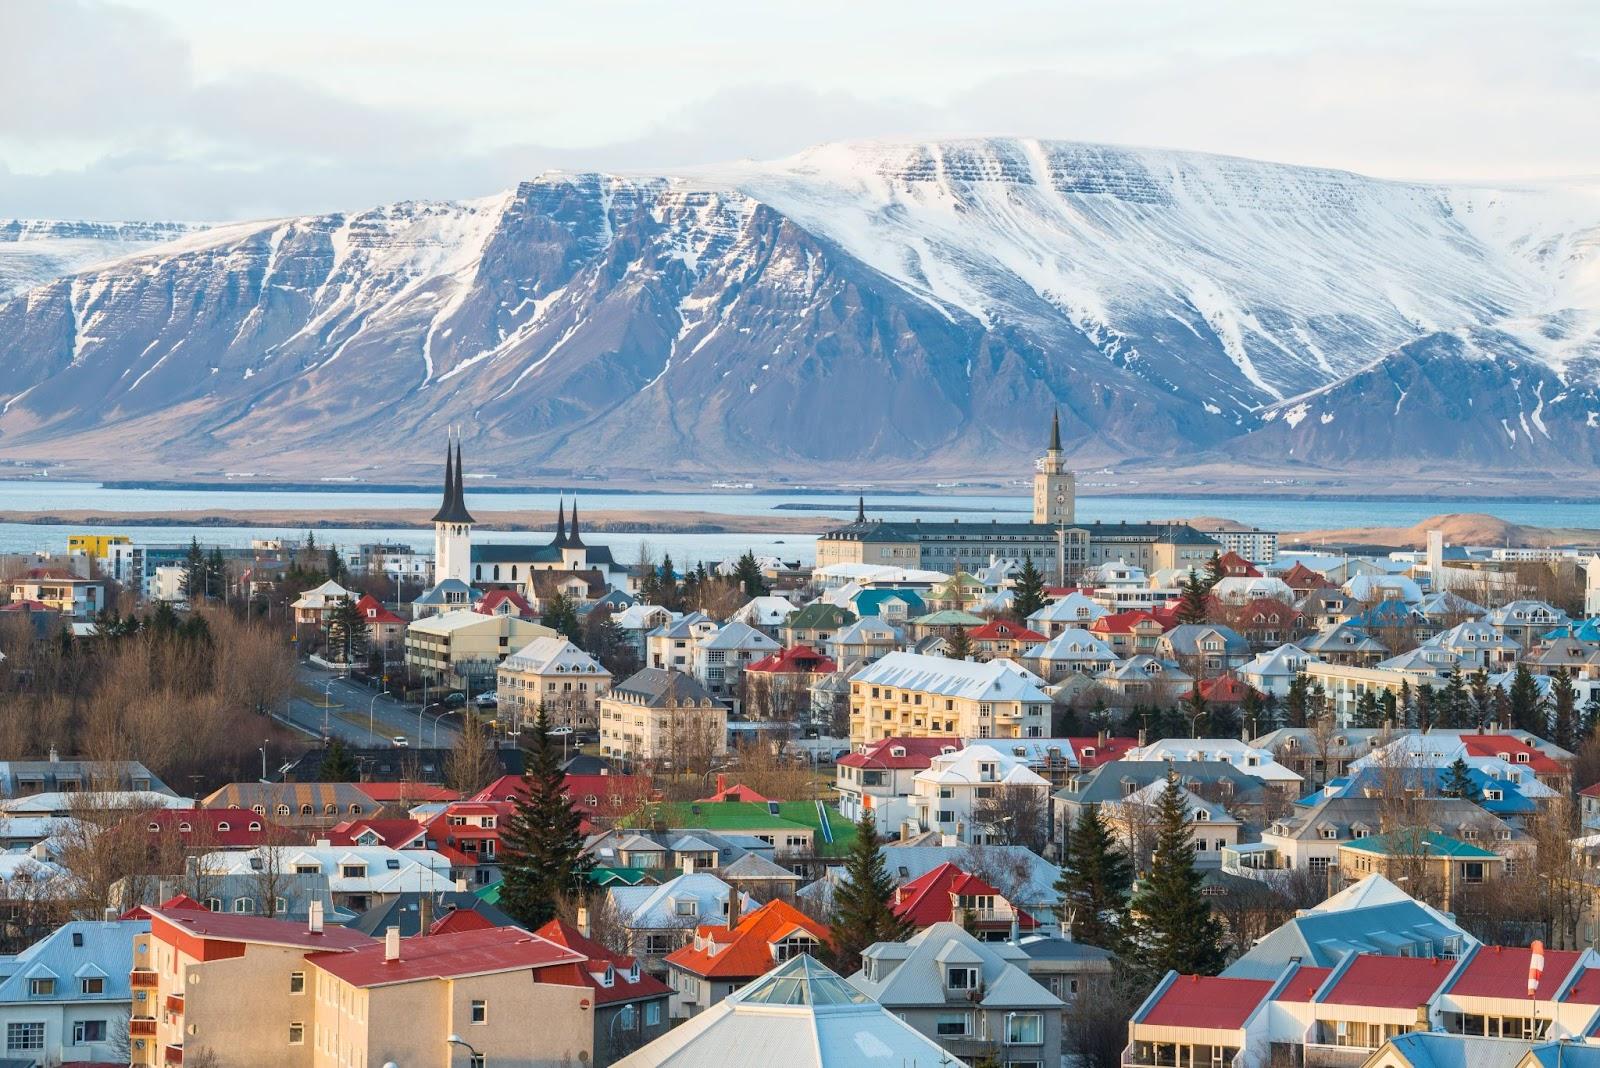 An Icelandic town overlooked by a snow covered mountain. 